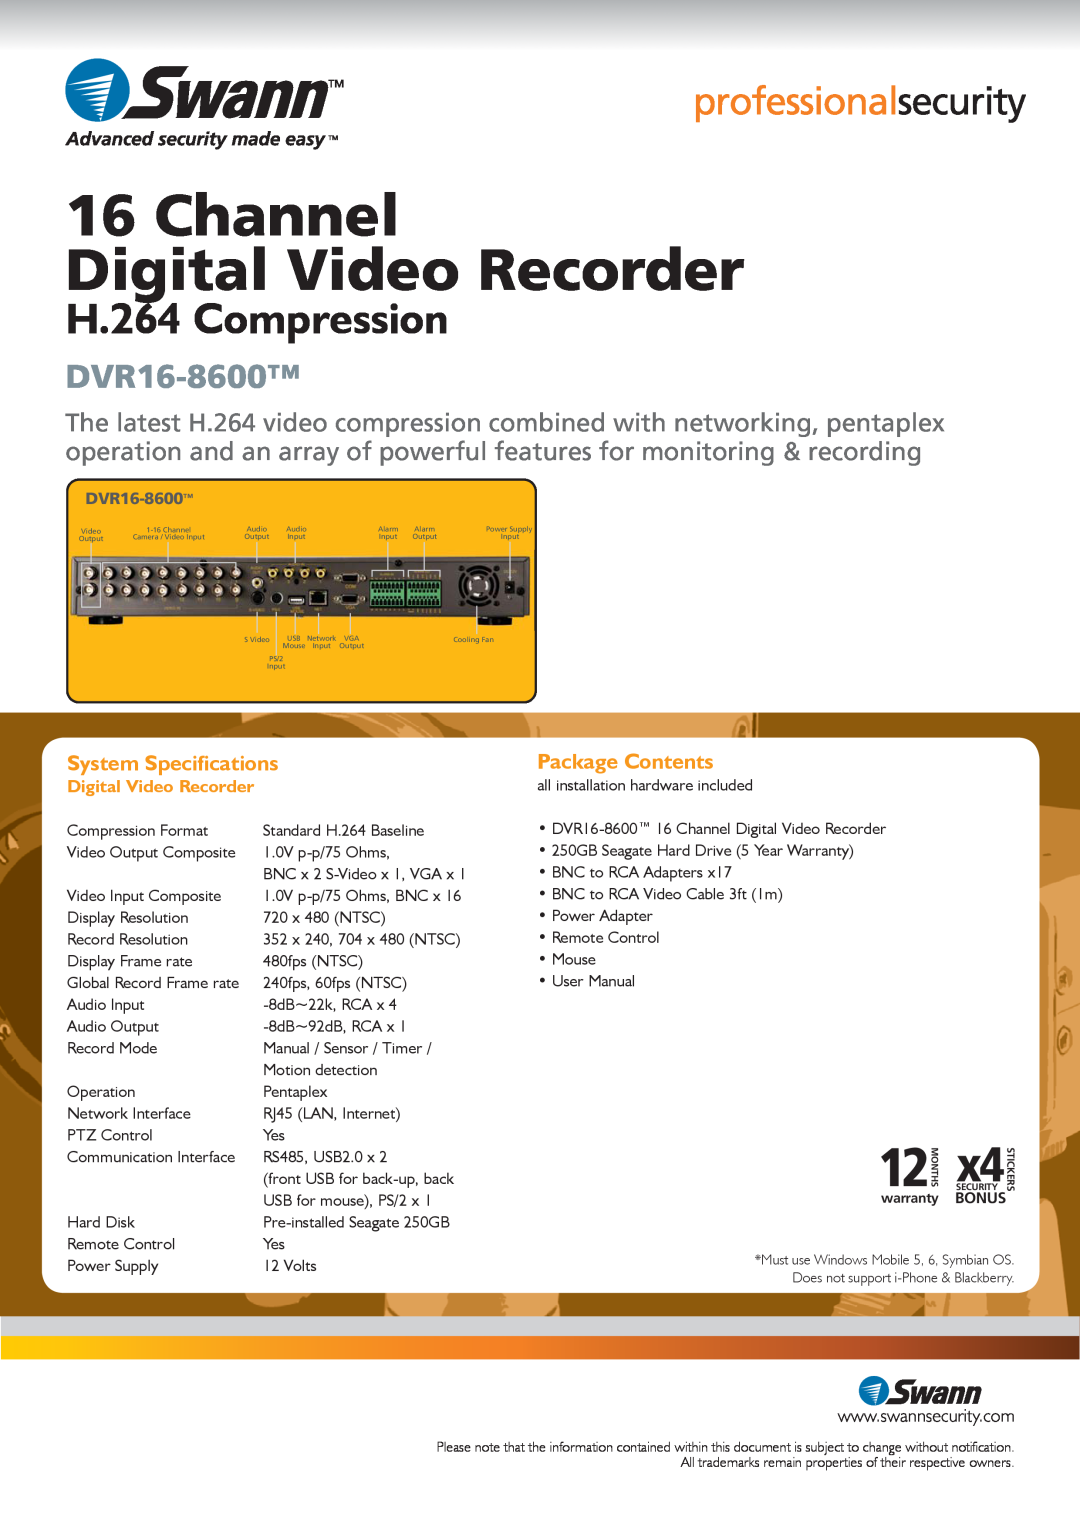 Swann SW242-6TH Channel Digital Video Recorder, H.264 Compression, DVR16-8600, System Specifications, Package Contents 